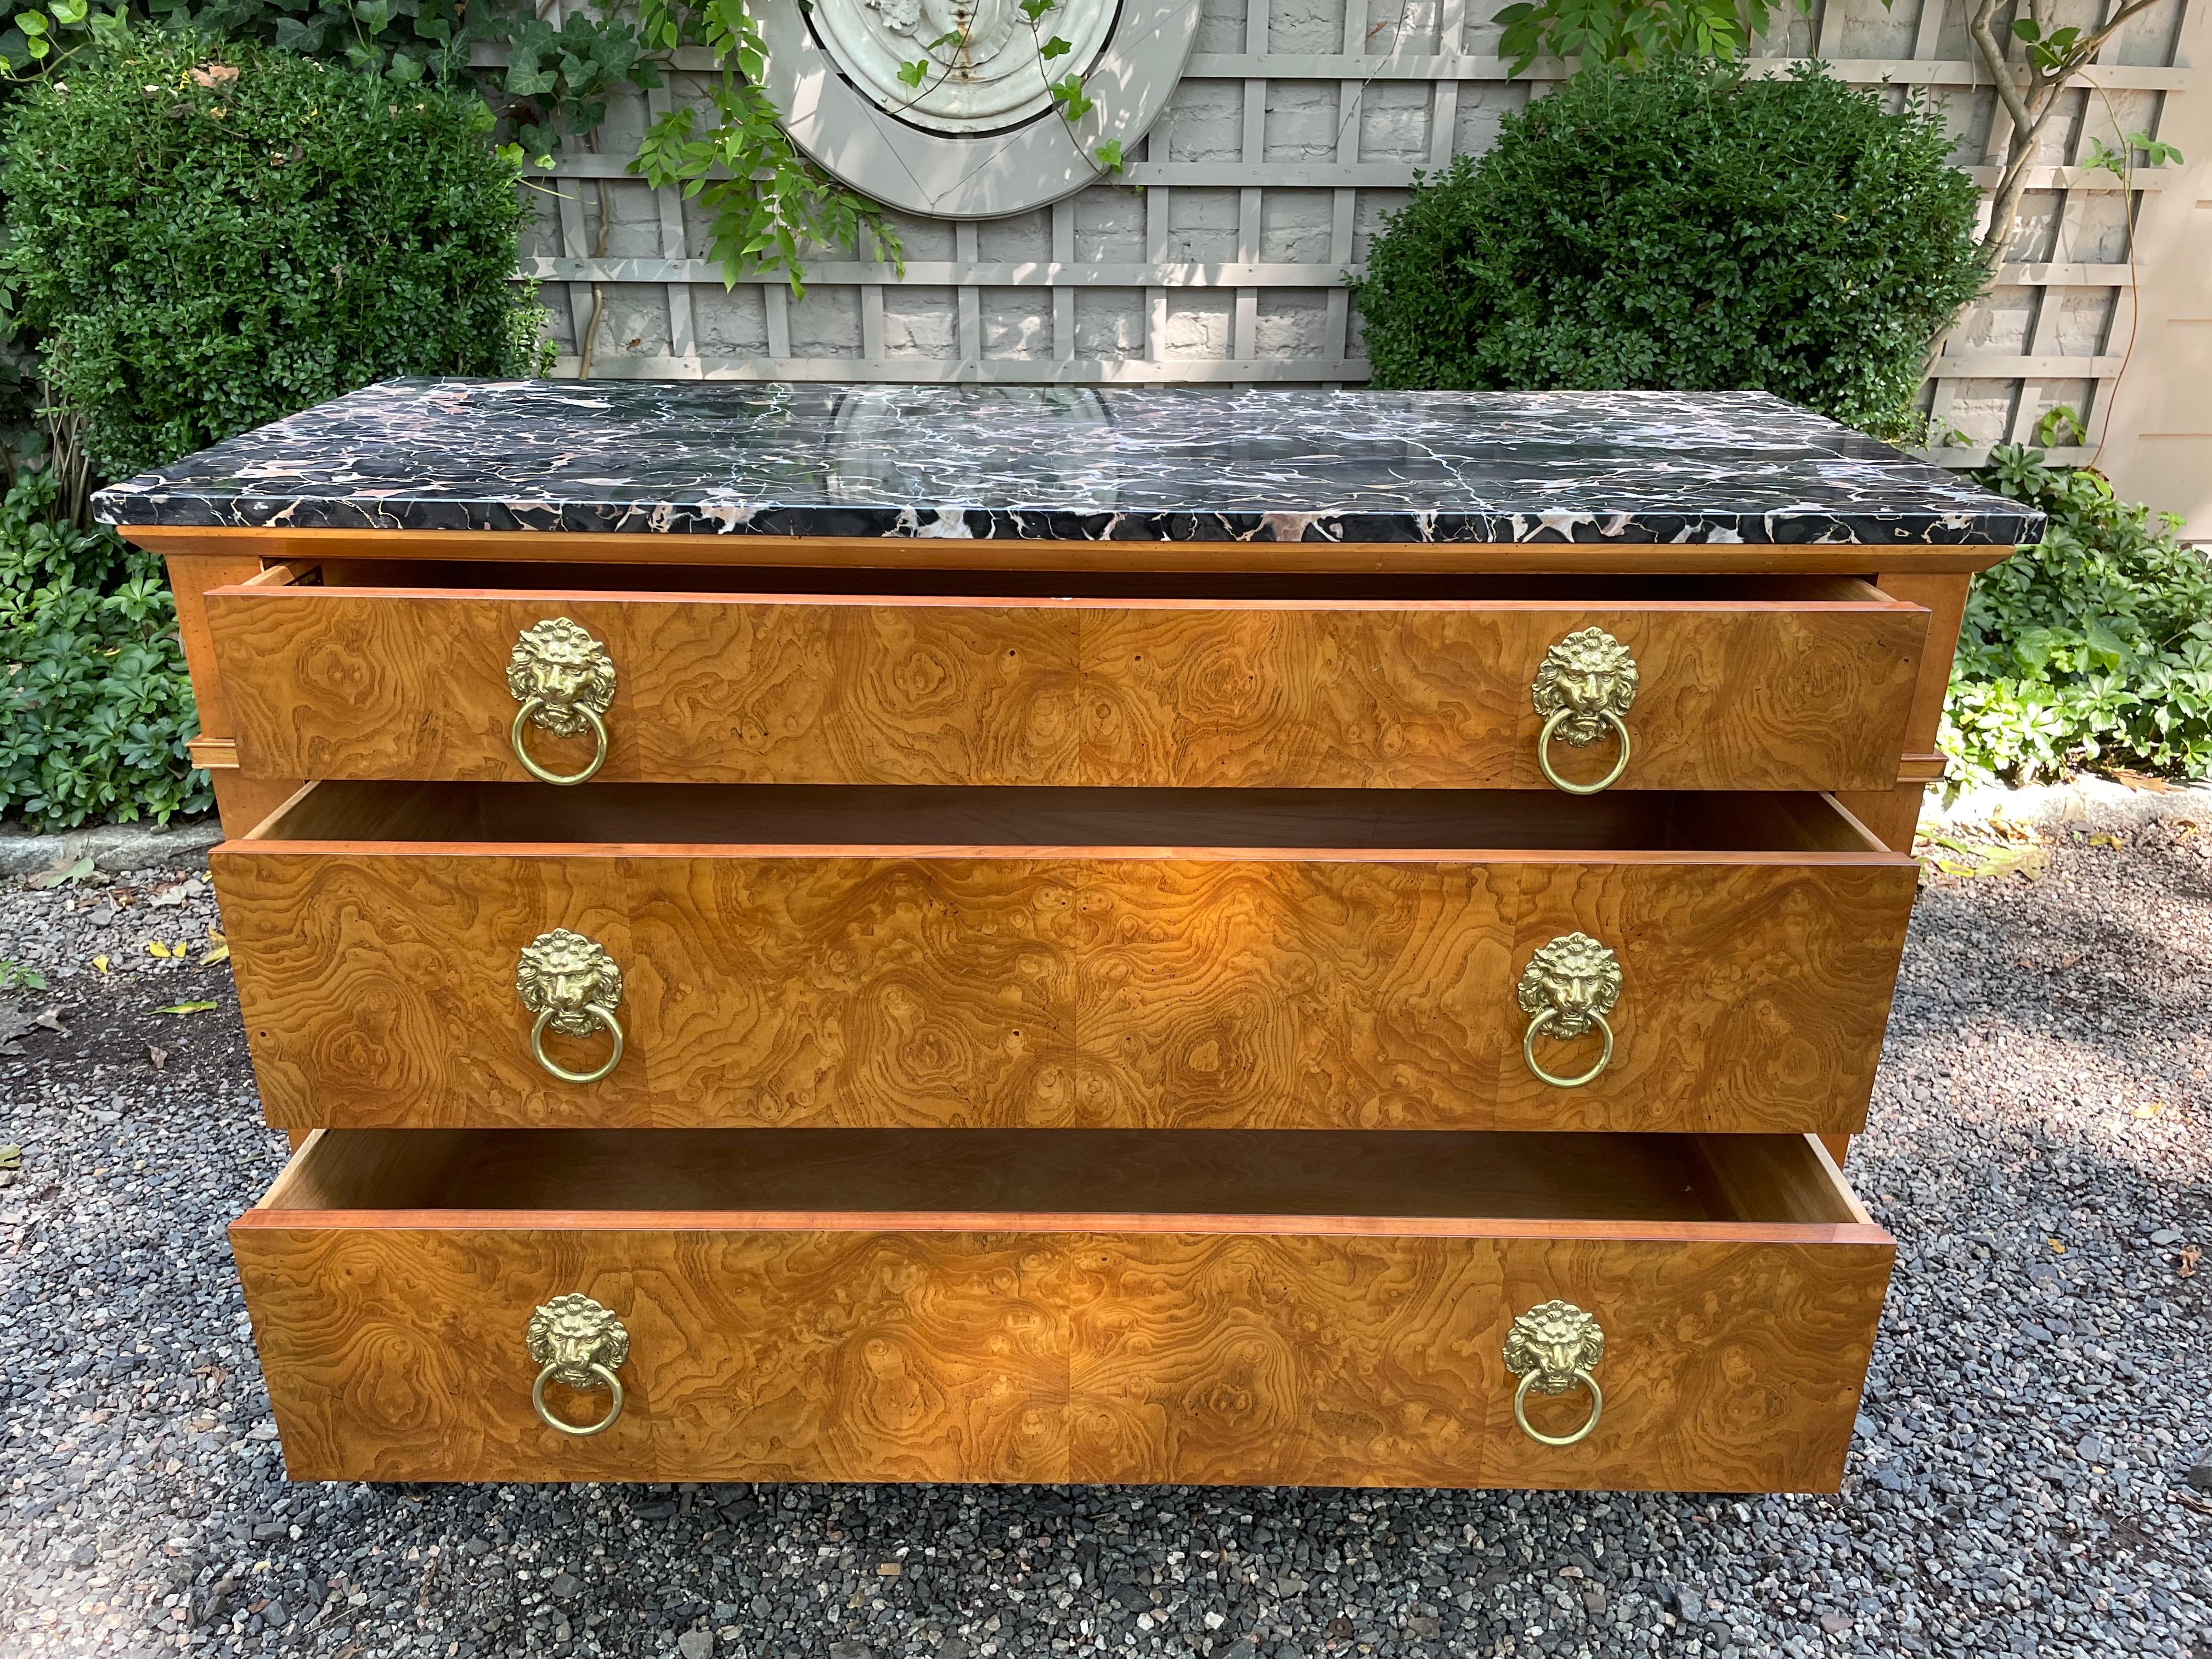 This is an exceptional vintage burlwood chest by Baker Furniture. The top is made of a 2” thick piece of black marble with lively veining. The chest has three drawers with the original lion’s head hardware in brass. Sexy ebonized lion paw feet